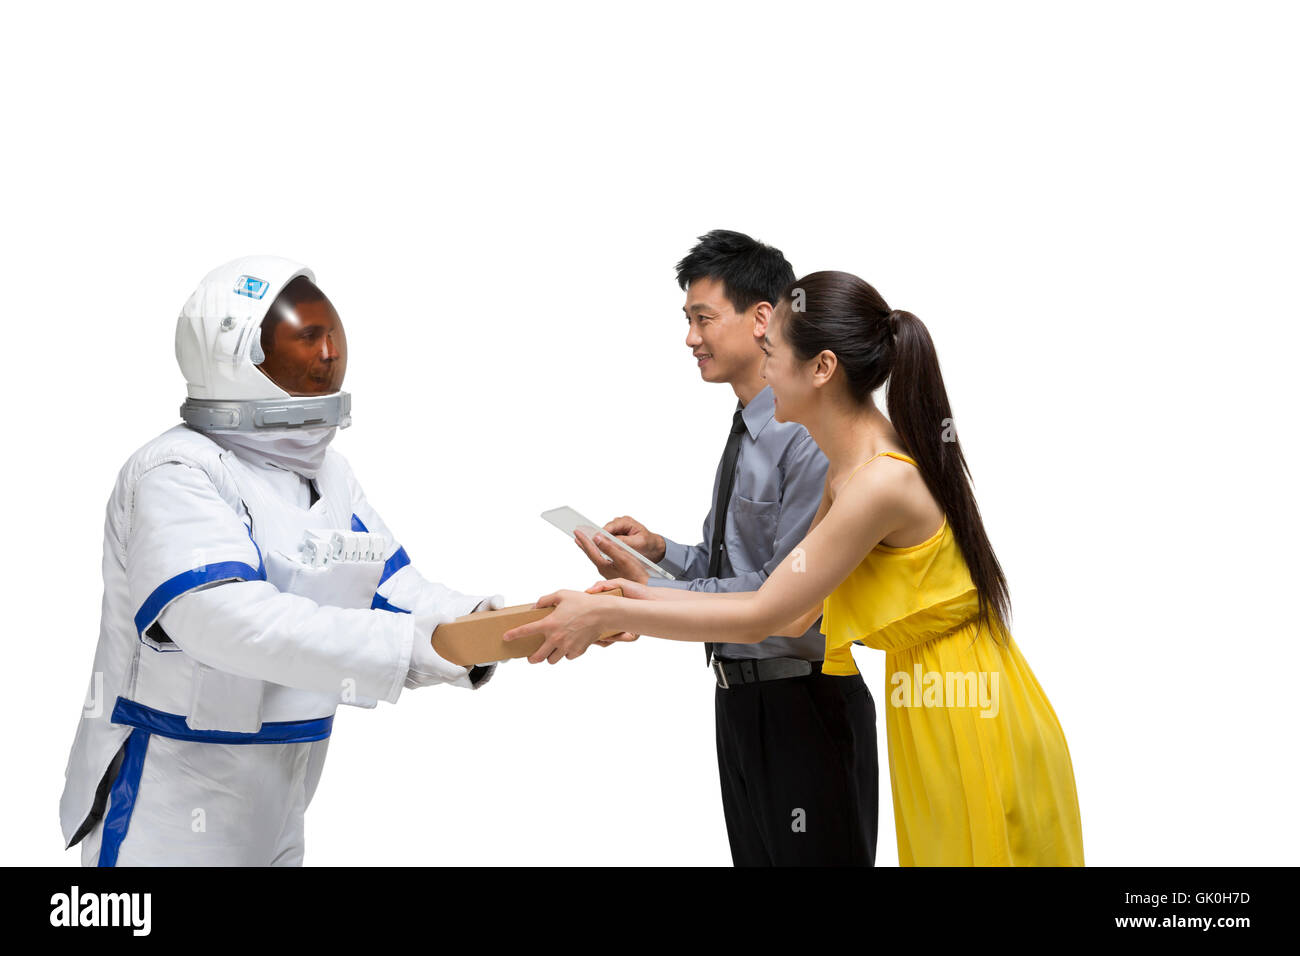 Studio shot astronaut express delivery Stock Photo